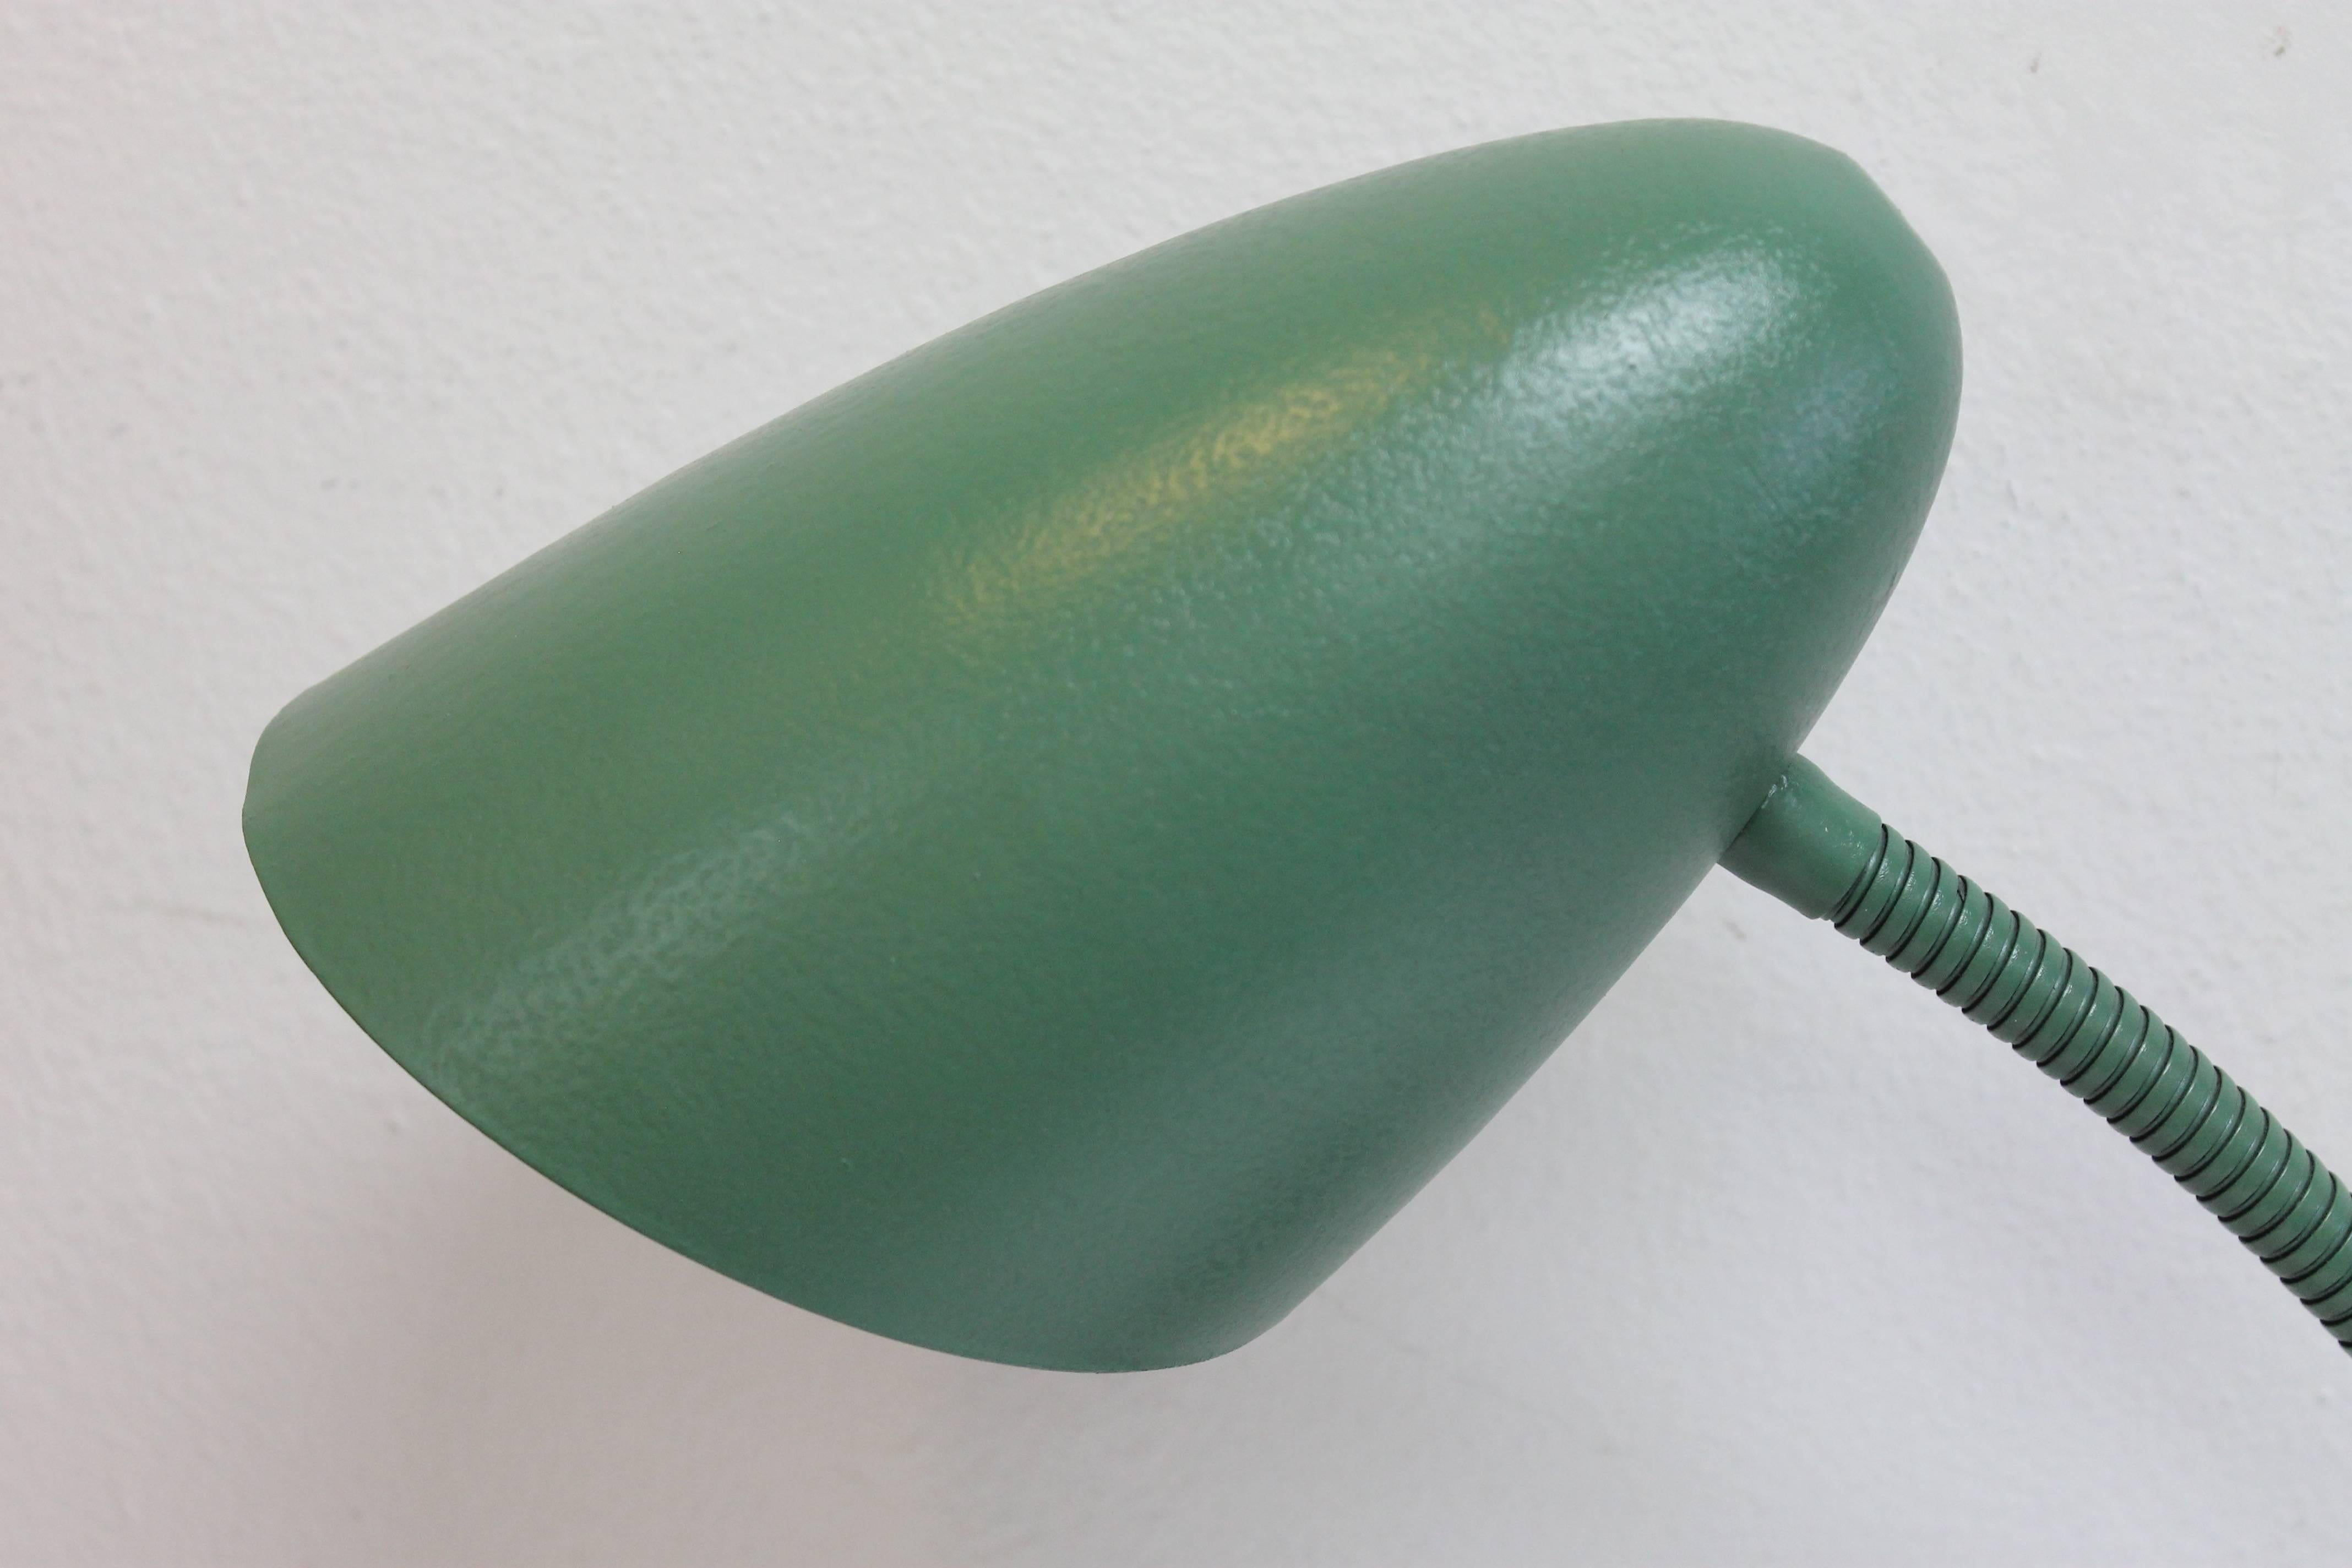 Green goose neck table lamp. Measures (as shown) 18